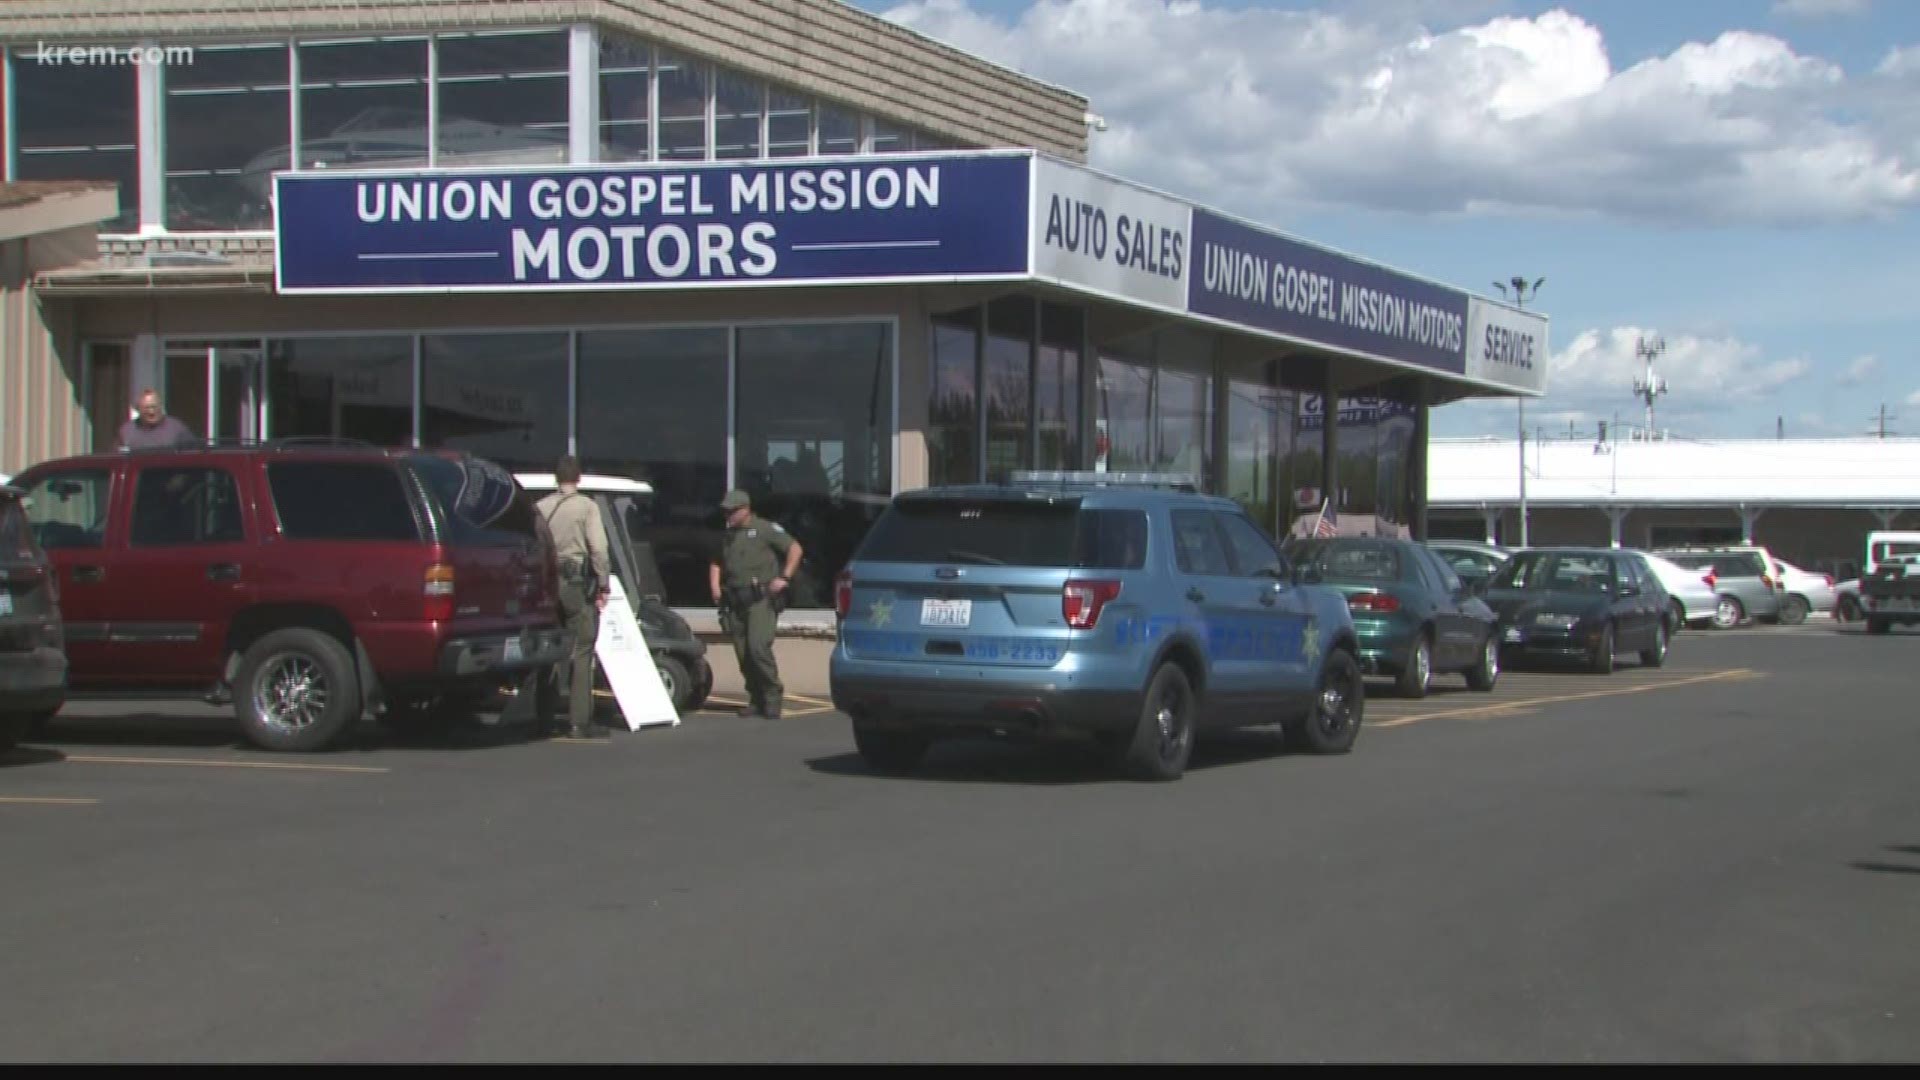 Union Gospel Mission Motors had several car batteries stolen, gas siphoned and cars vandalized by someone with a BB gun.